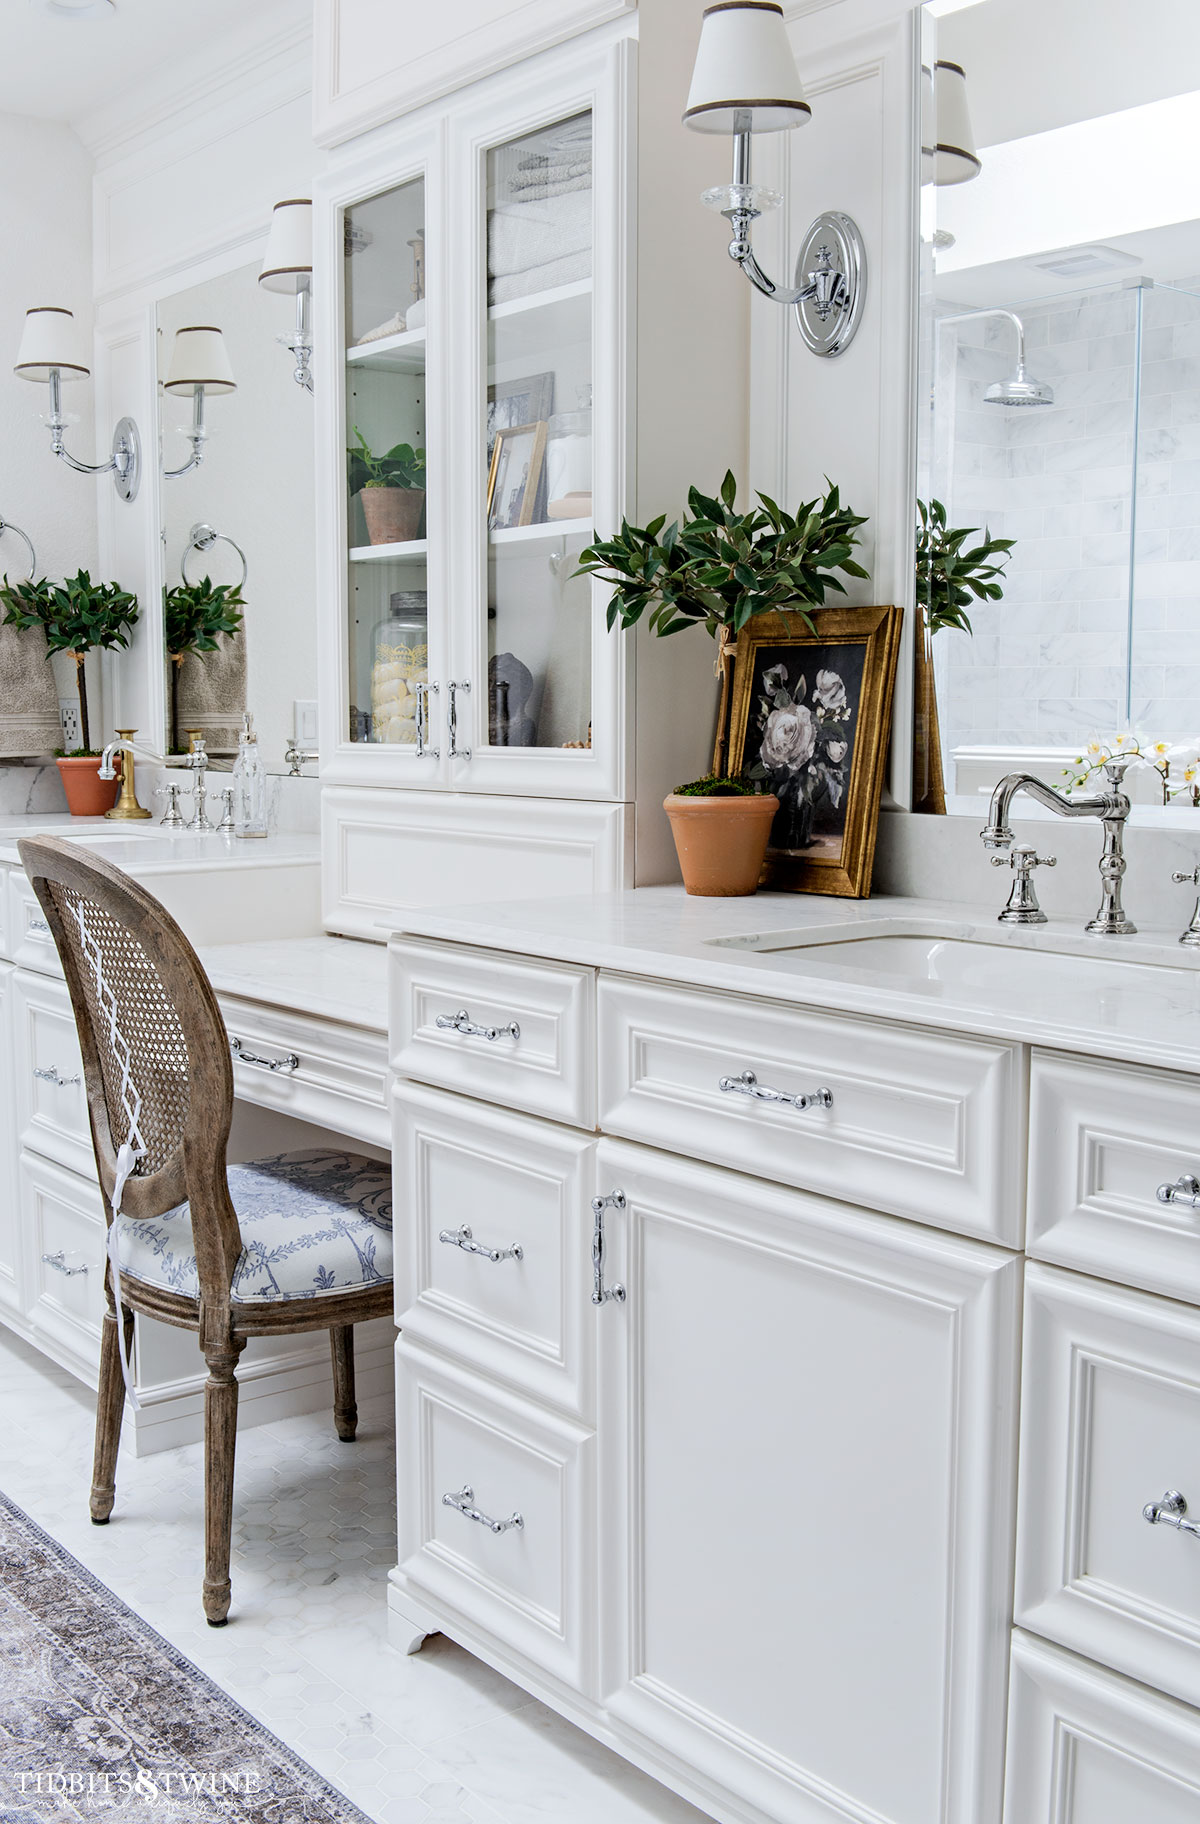 double white bathroom vanity with makeup area and shelving in the center and french side chair